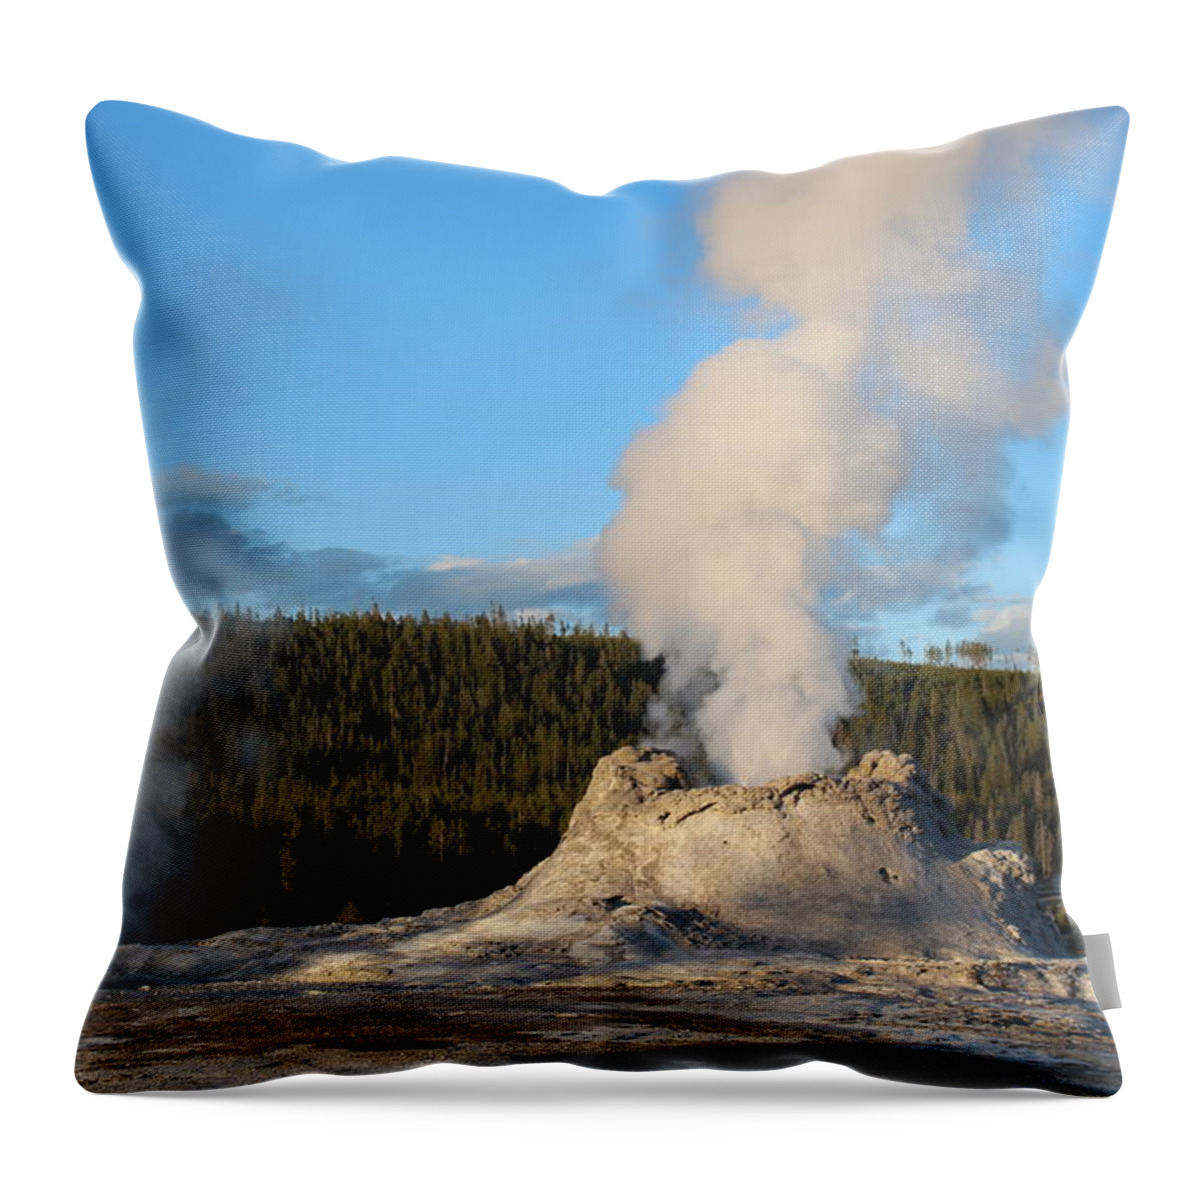 Geyser Throw Pillow featuring the photograph Castle Geyser by John Connor Bray